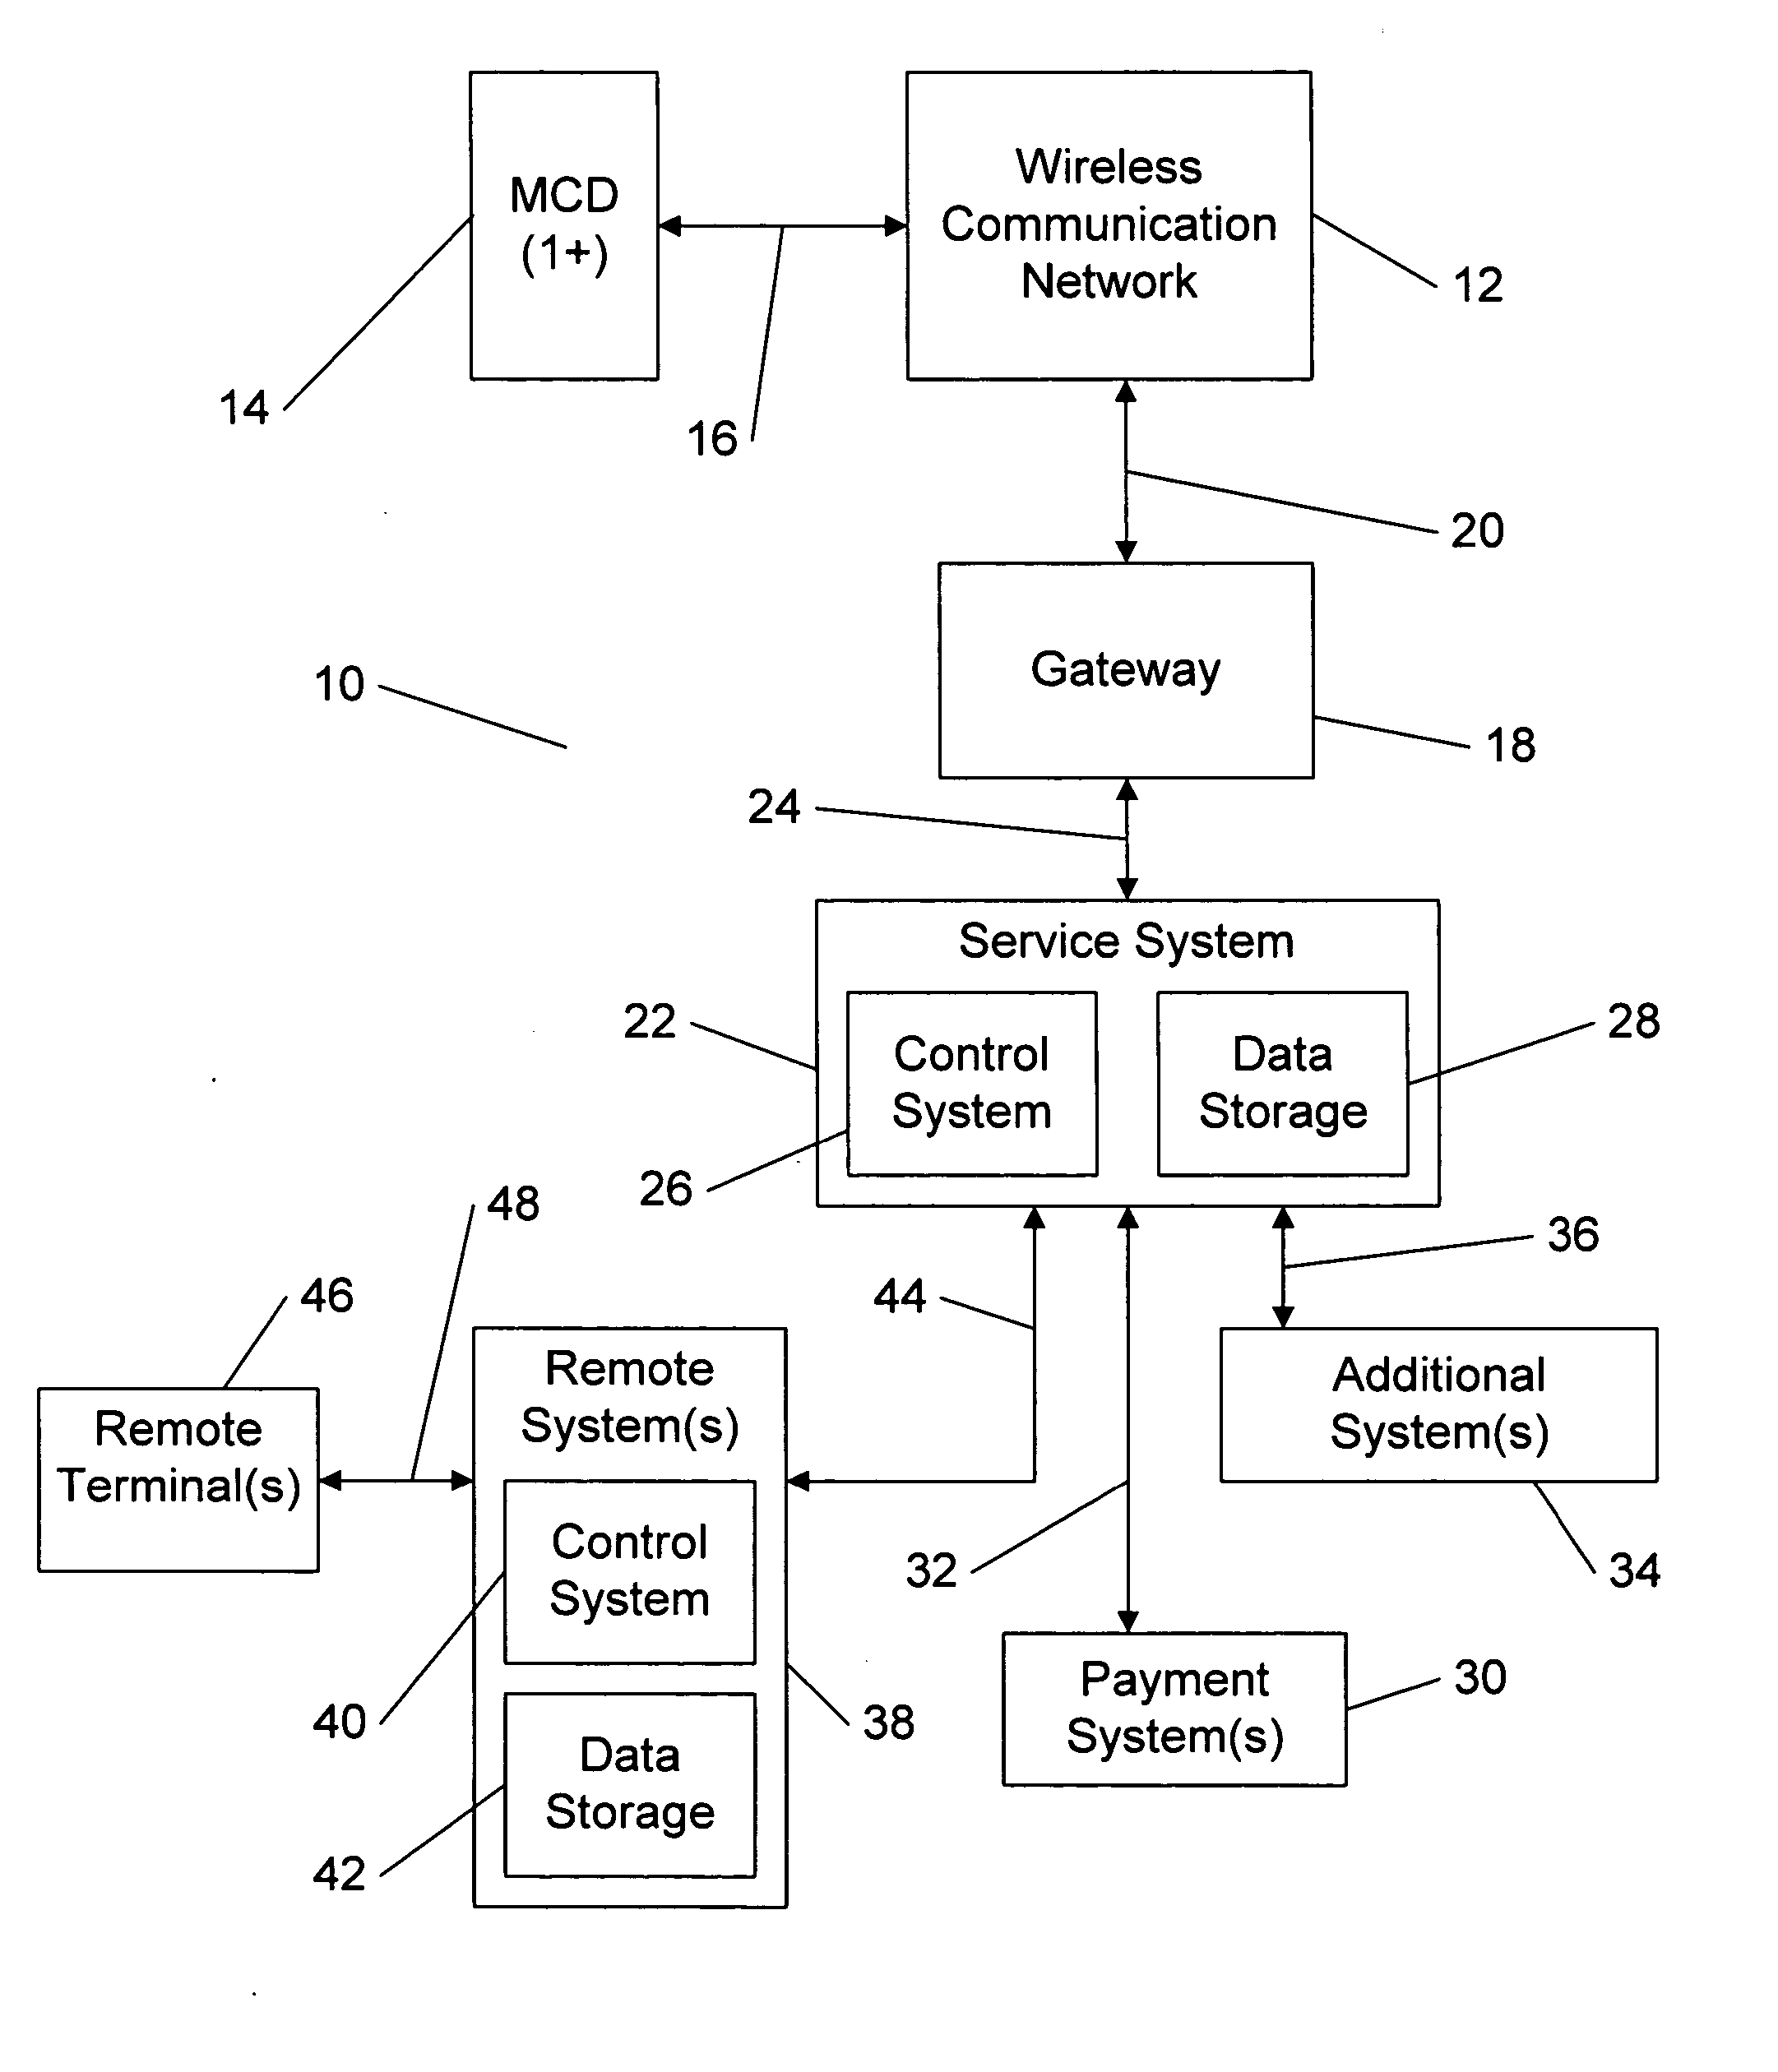 System and method for providing commercial services over a wireless communication network